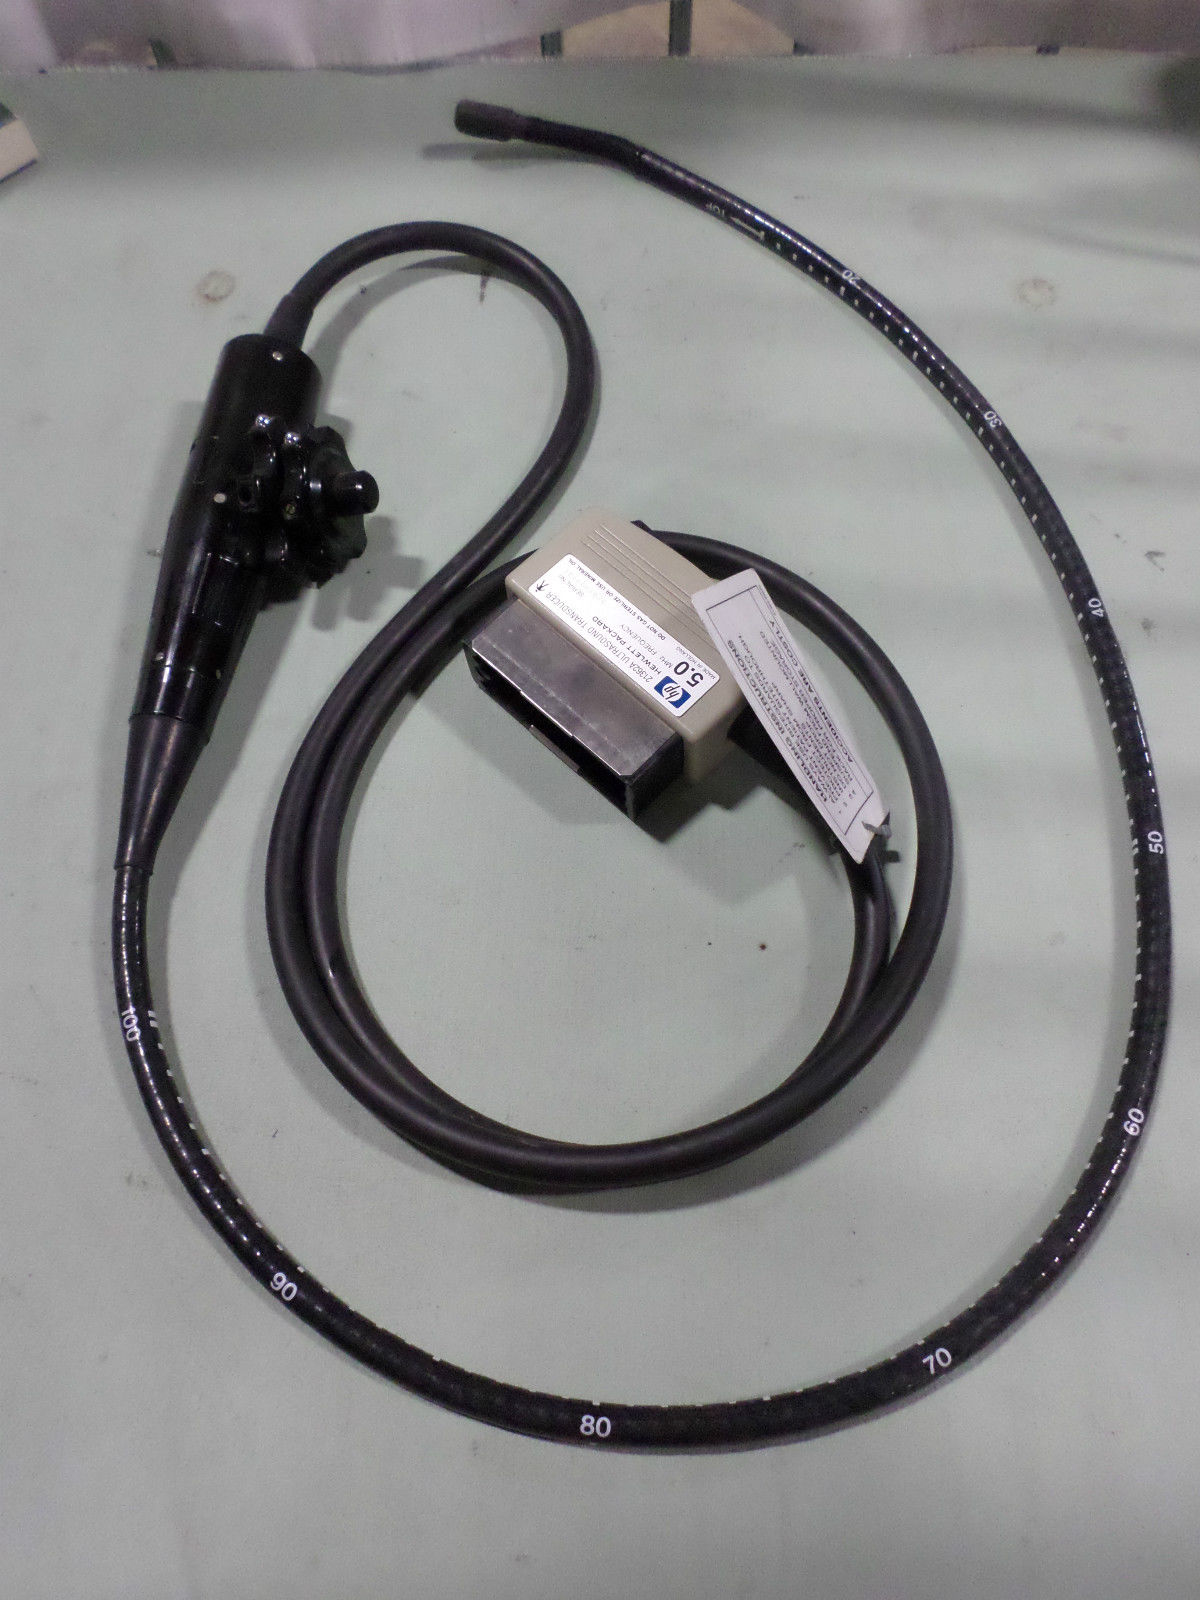 a black cord connected to probe